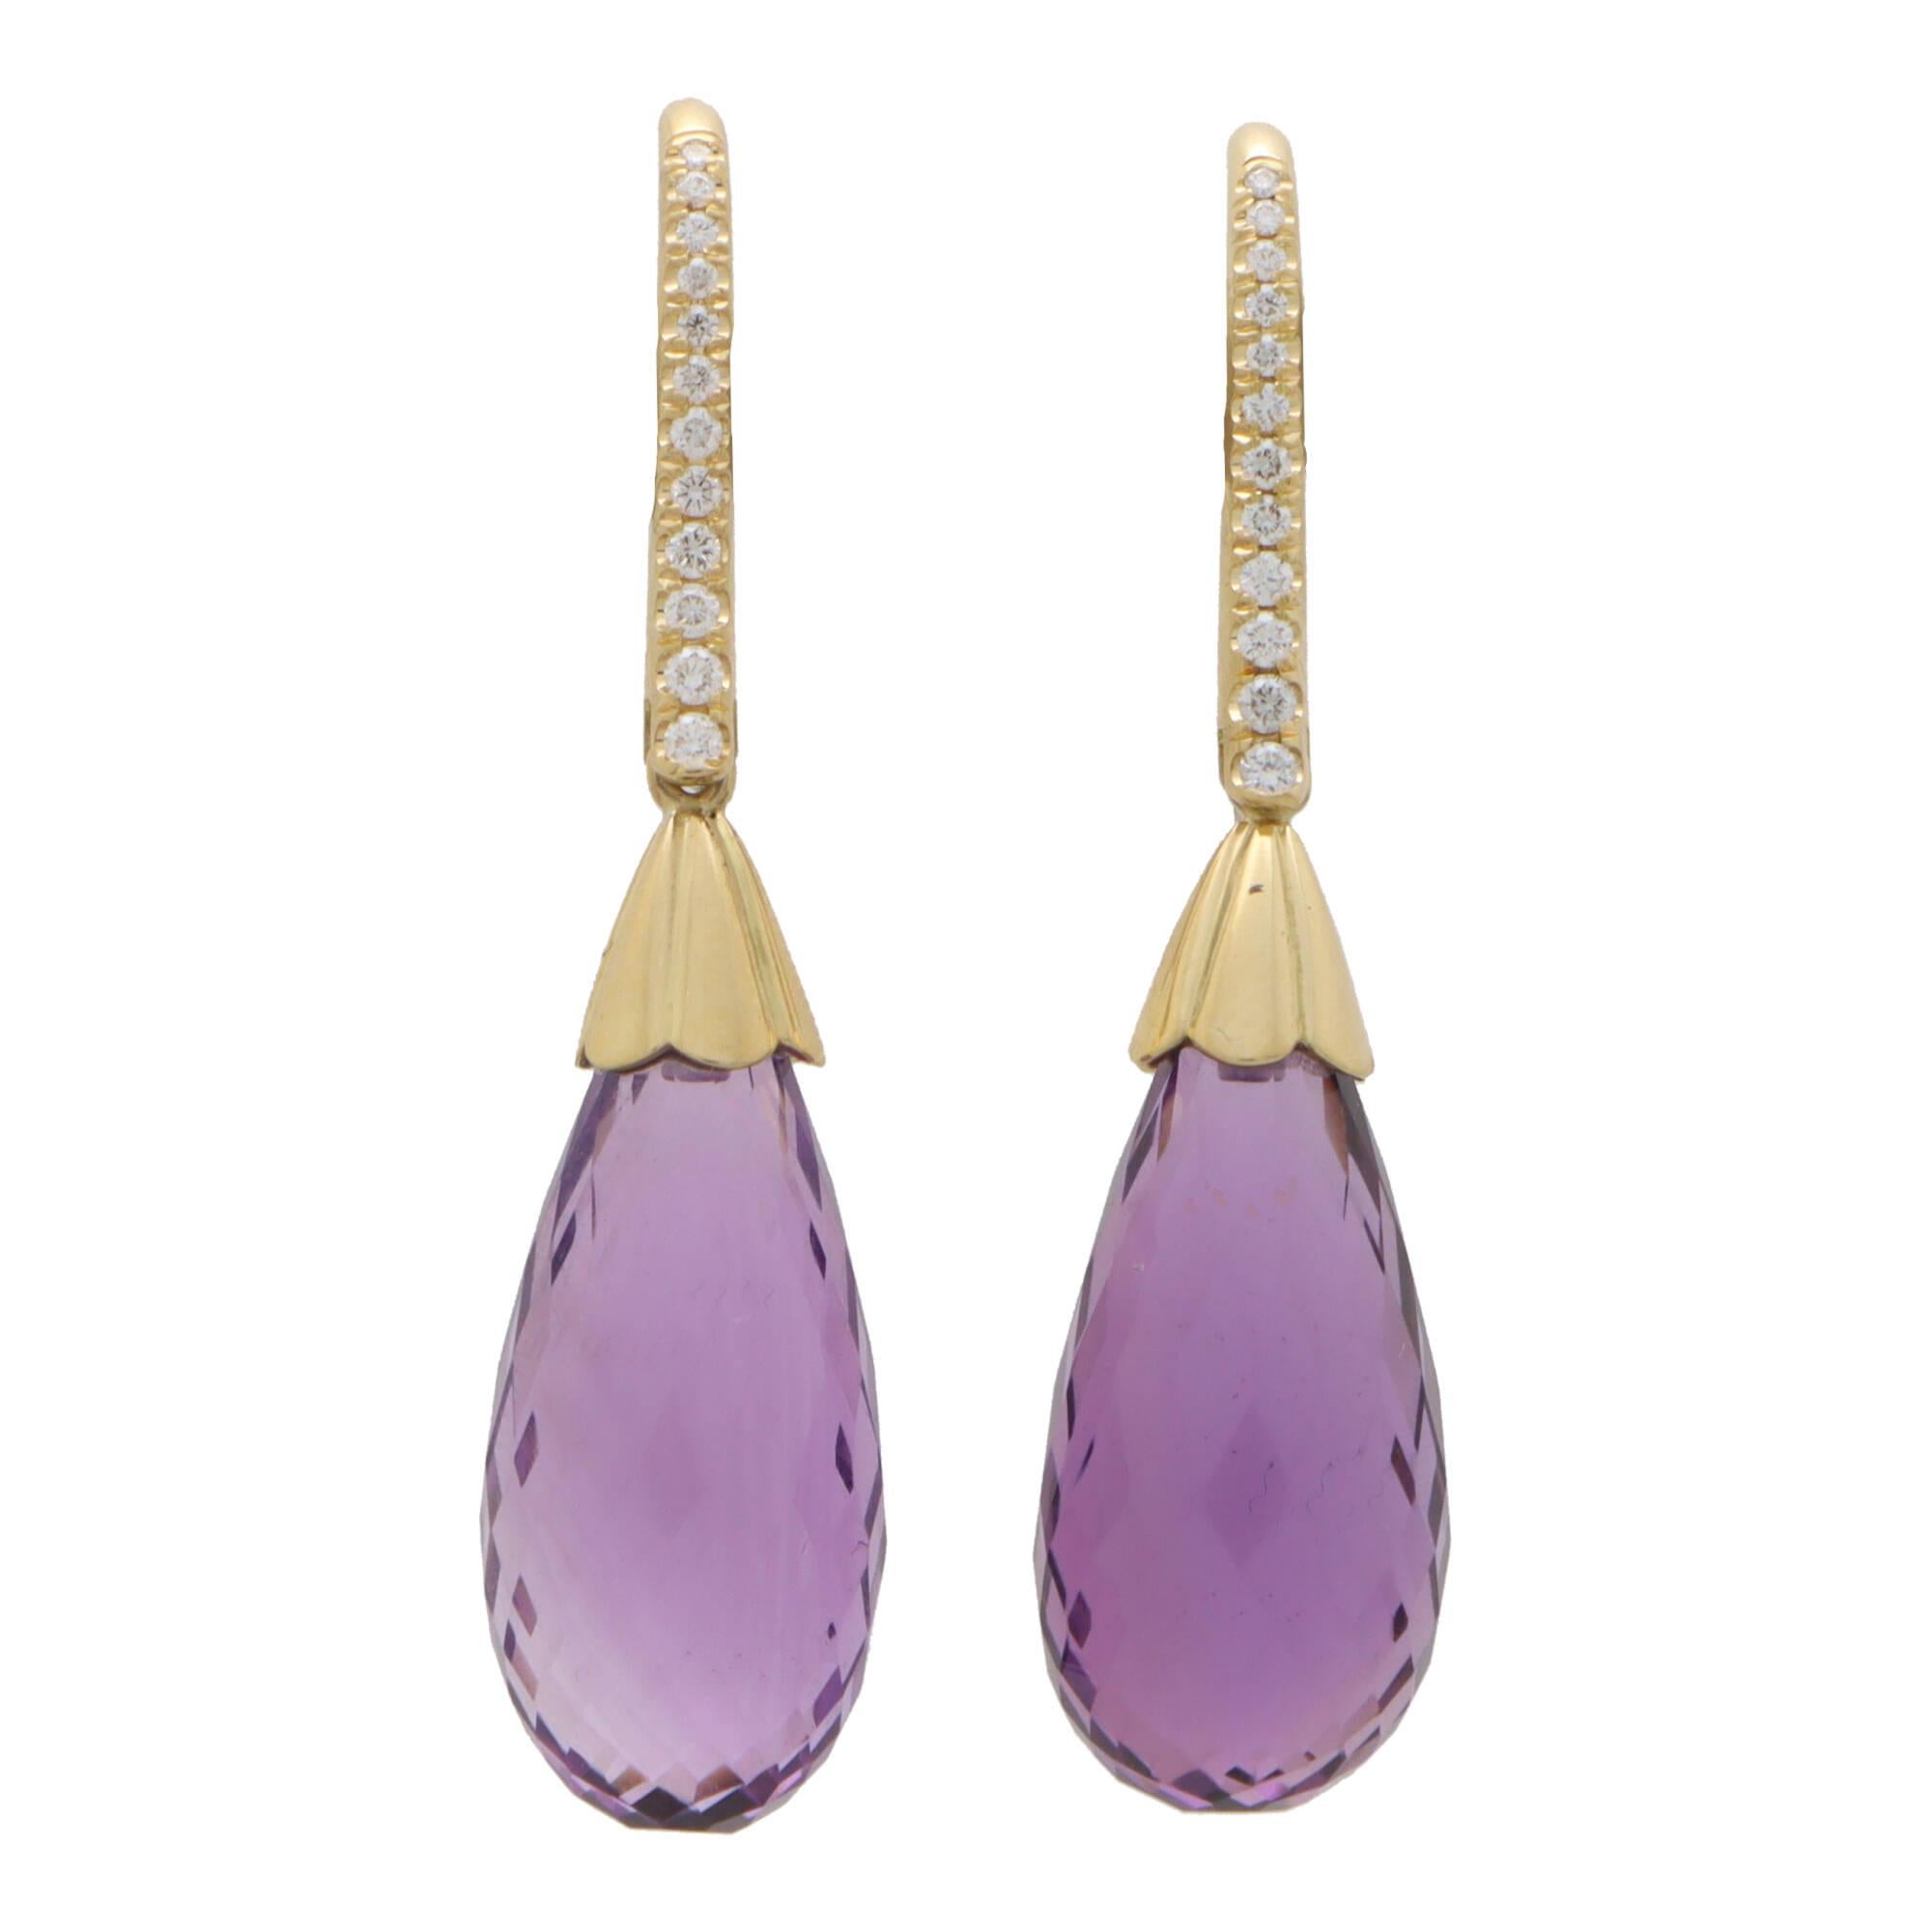 Contemporary Briolette Cut Amethyst and Diamond Drop Earrings